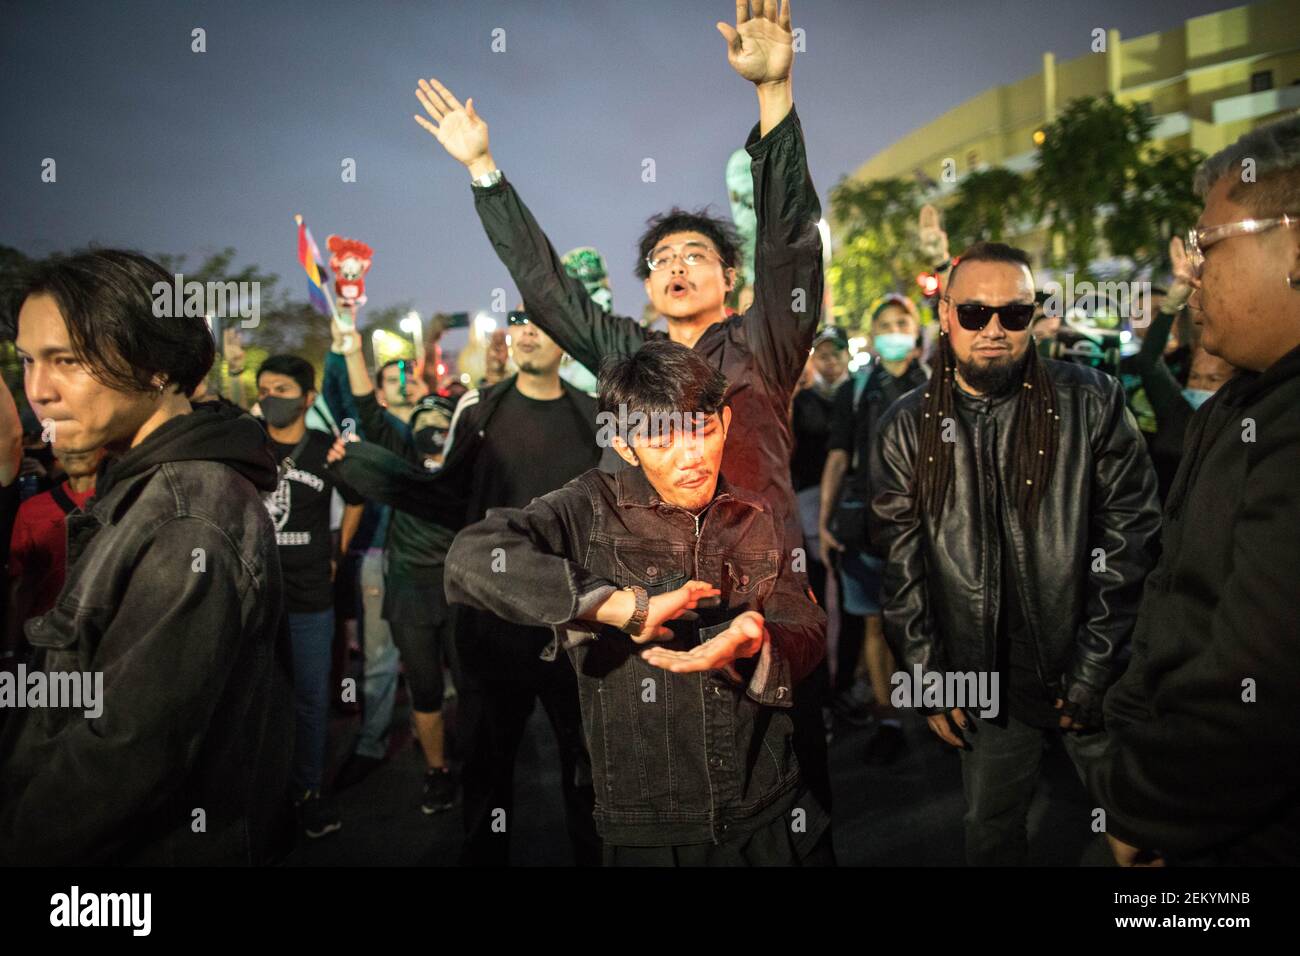 Thailand Rap group "Rap Against Dictatorship" (RAD) famous for their  anti-government songs perform as they record their new video clip during an  anti-government demonstration in the Thai Capital where pro-democracy  protesters took